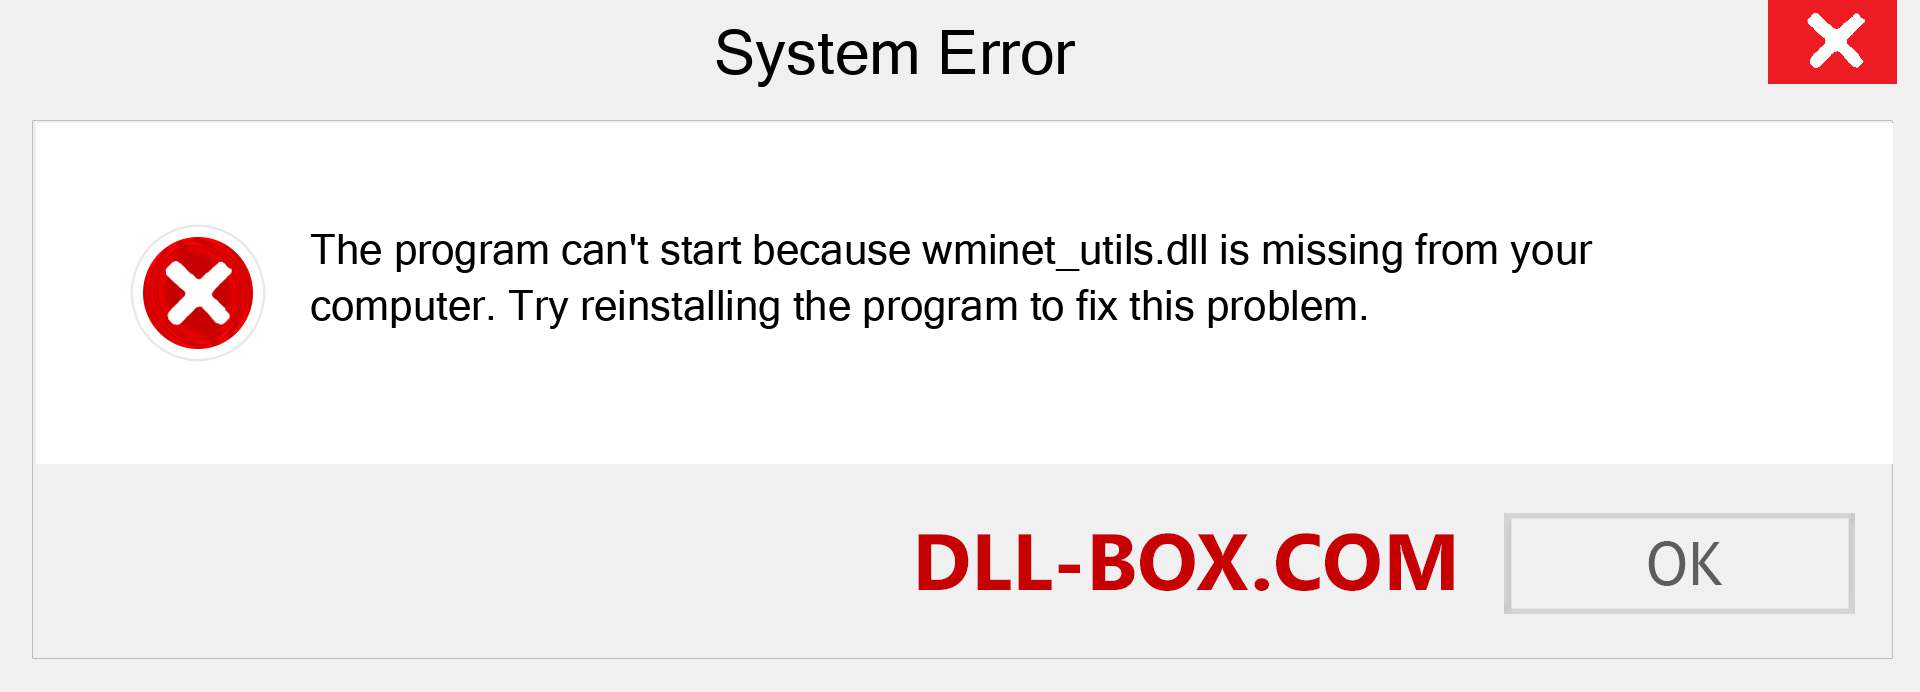  wminet_utils.dll file is missing?. Download for Windows 7, 8, 10 - Fix  wminet_utils dll Missing Error on Windows, photos, images